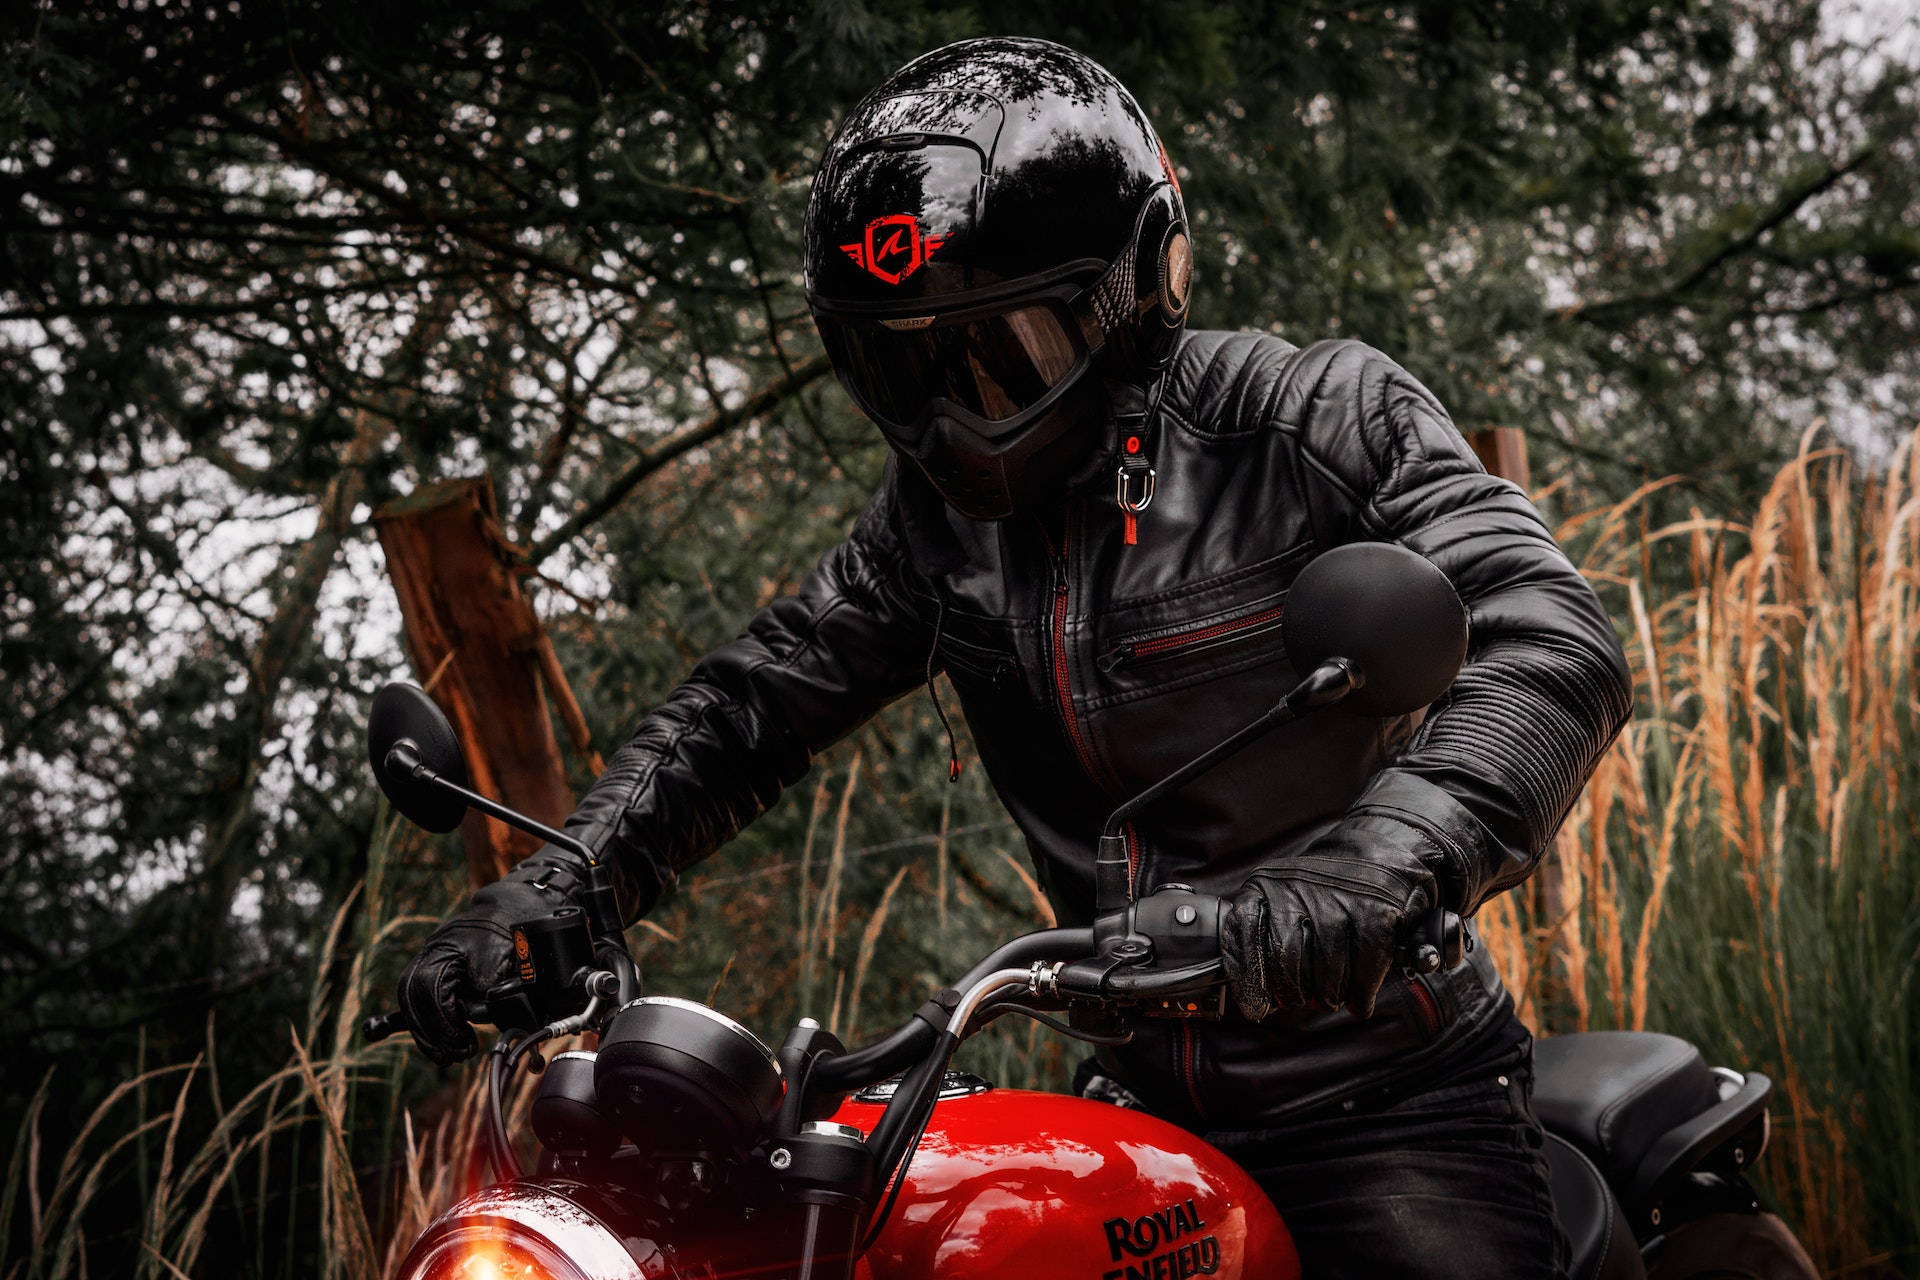 Bike Rider In Black And Red